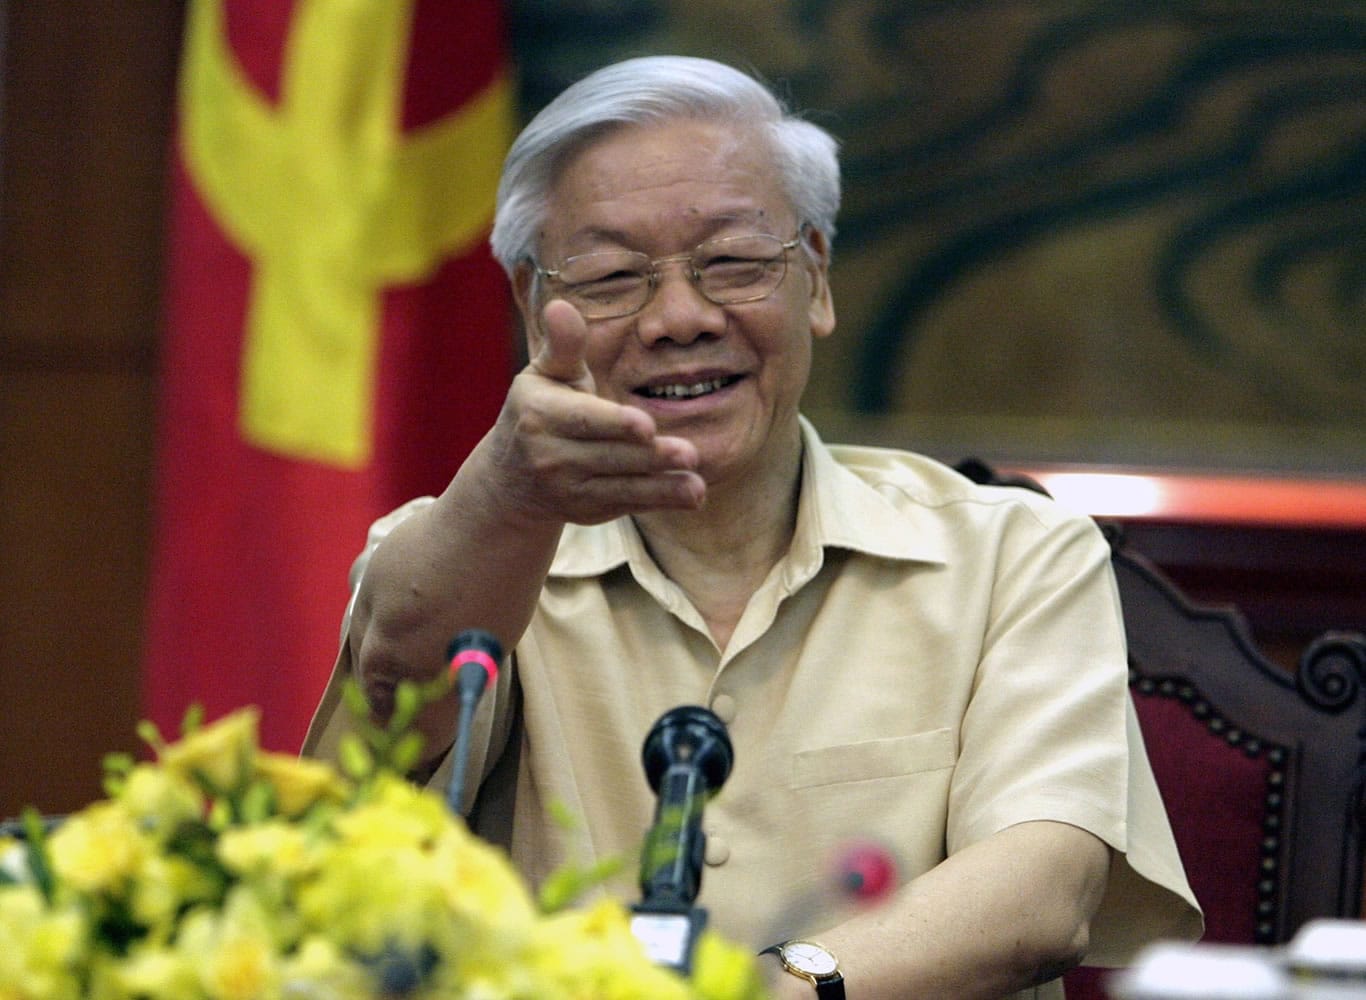 Vietnamese Communist Party General Secretary Nguyen Phu Trong gestures during a meeting with the Western press in Hanoi, Vietnam.